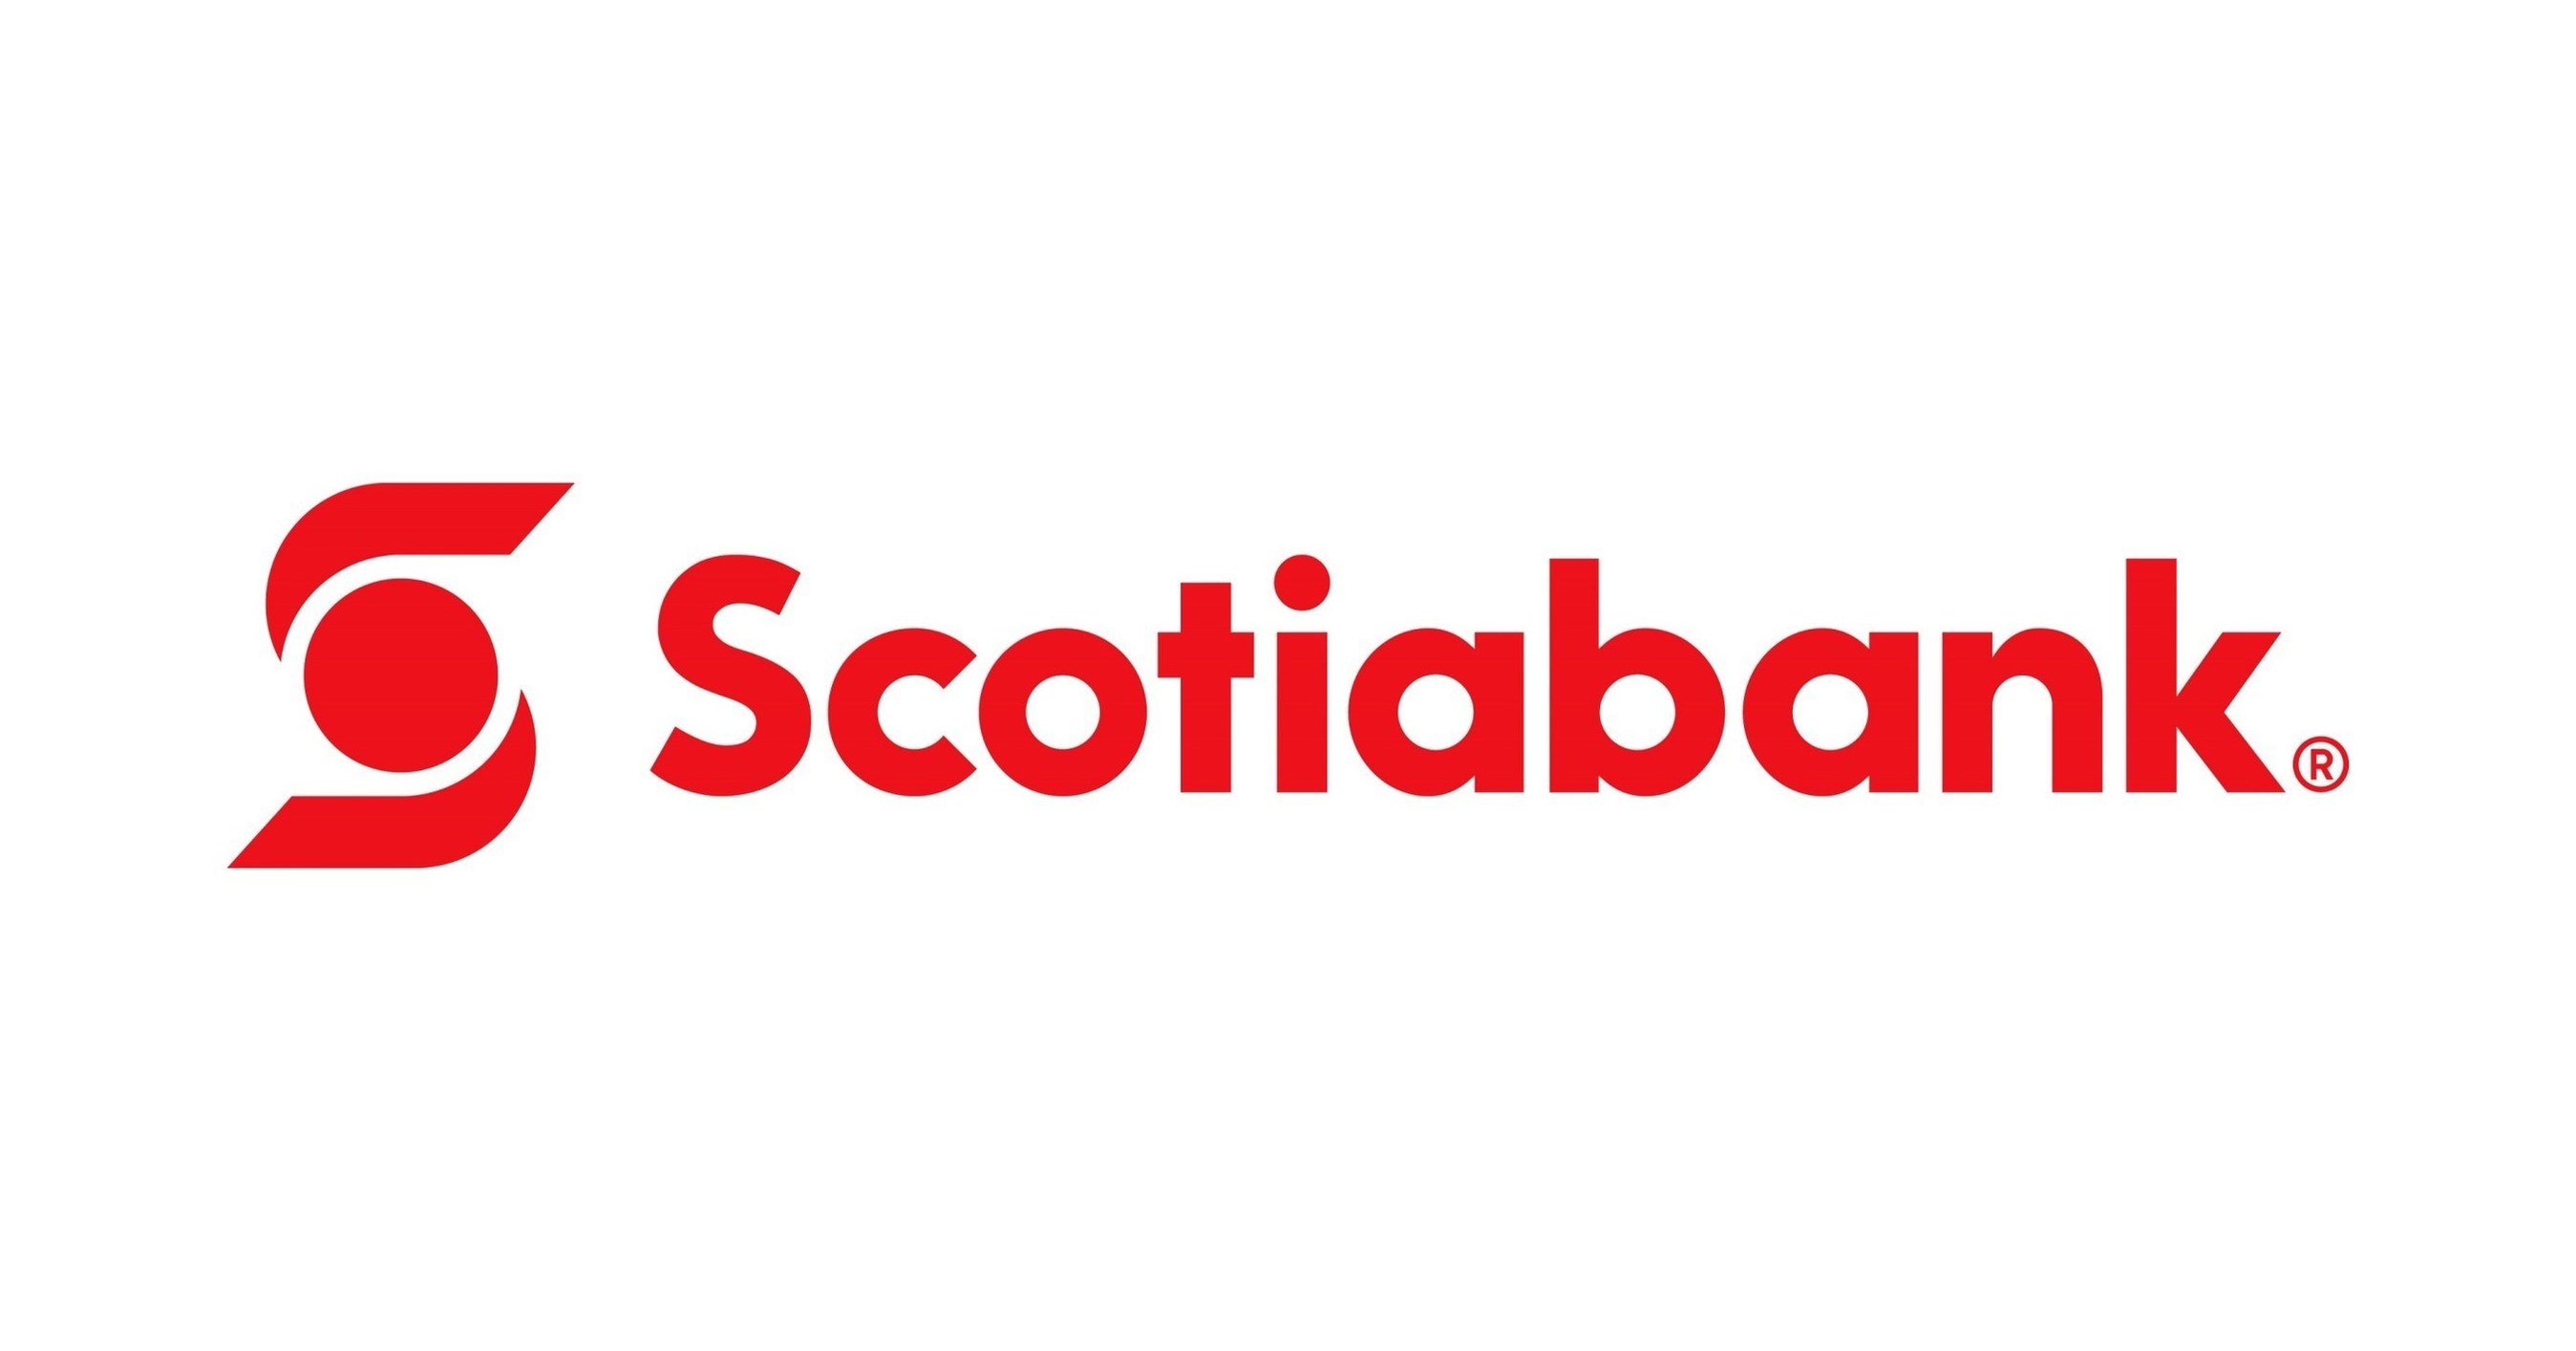 Scotiabank Ultimate Package Review: Pros and Cons in 2022